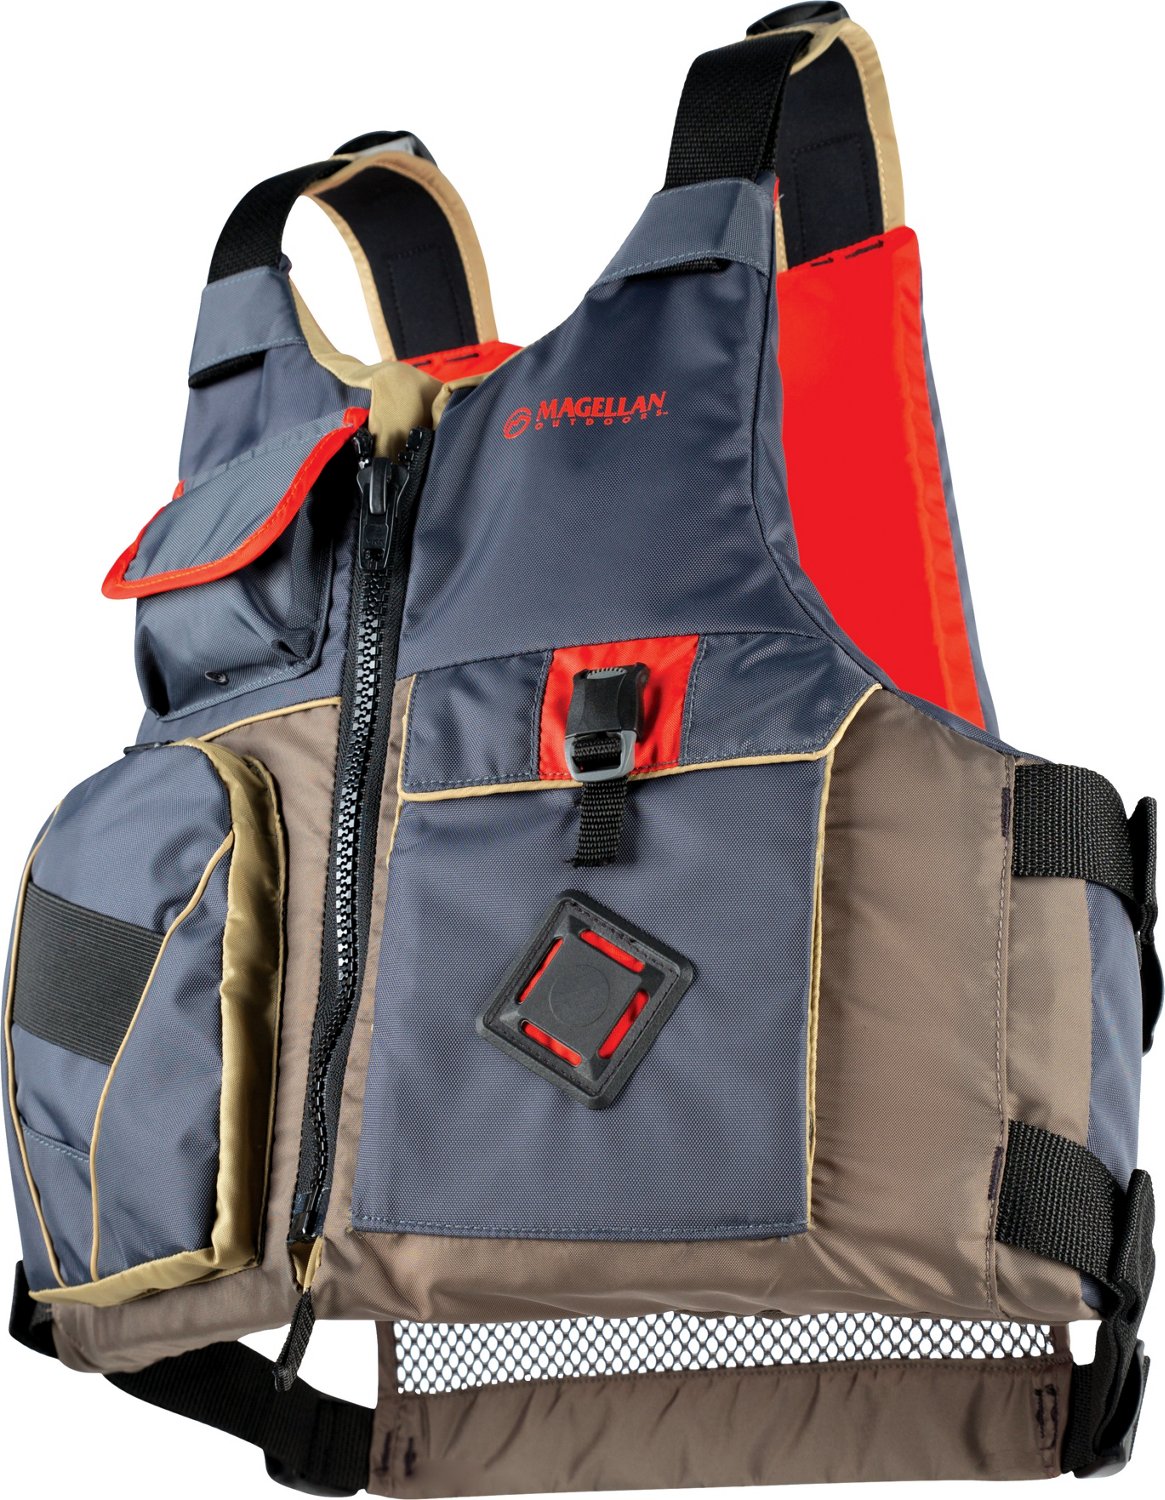 Ascend Deluxe Life Jacket for Adults